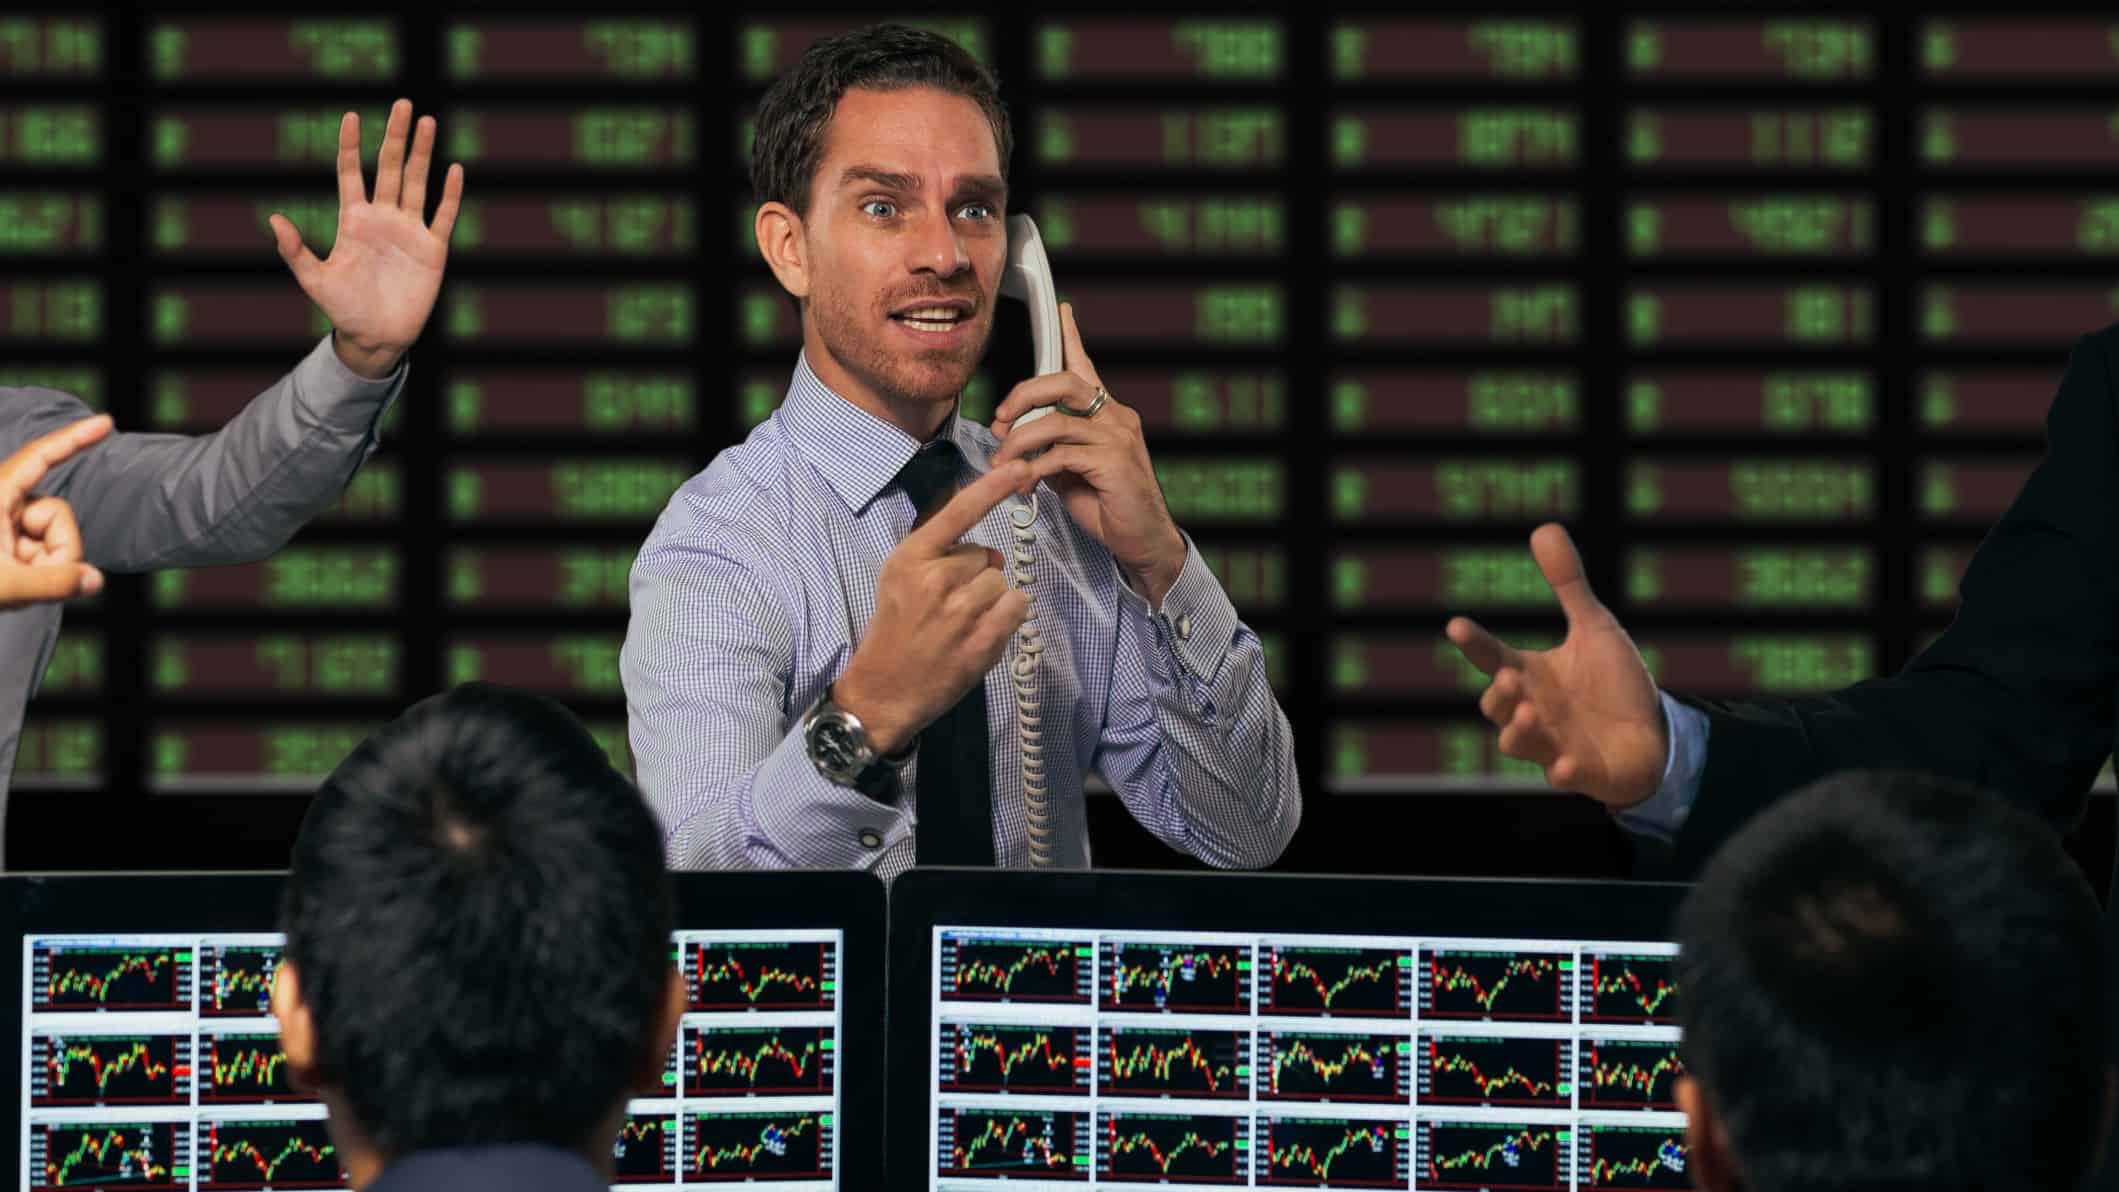 busy trader on the phone in front of board depicting asx share price risers and fallers